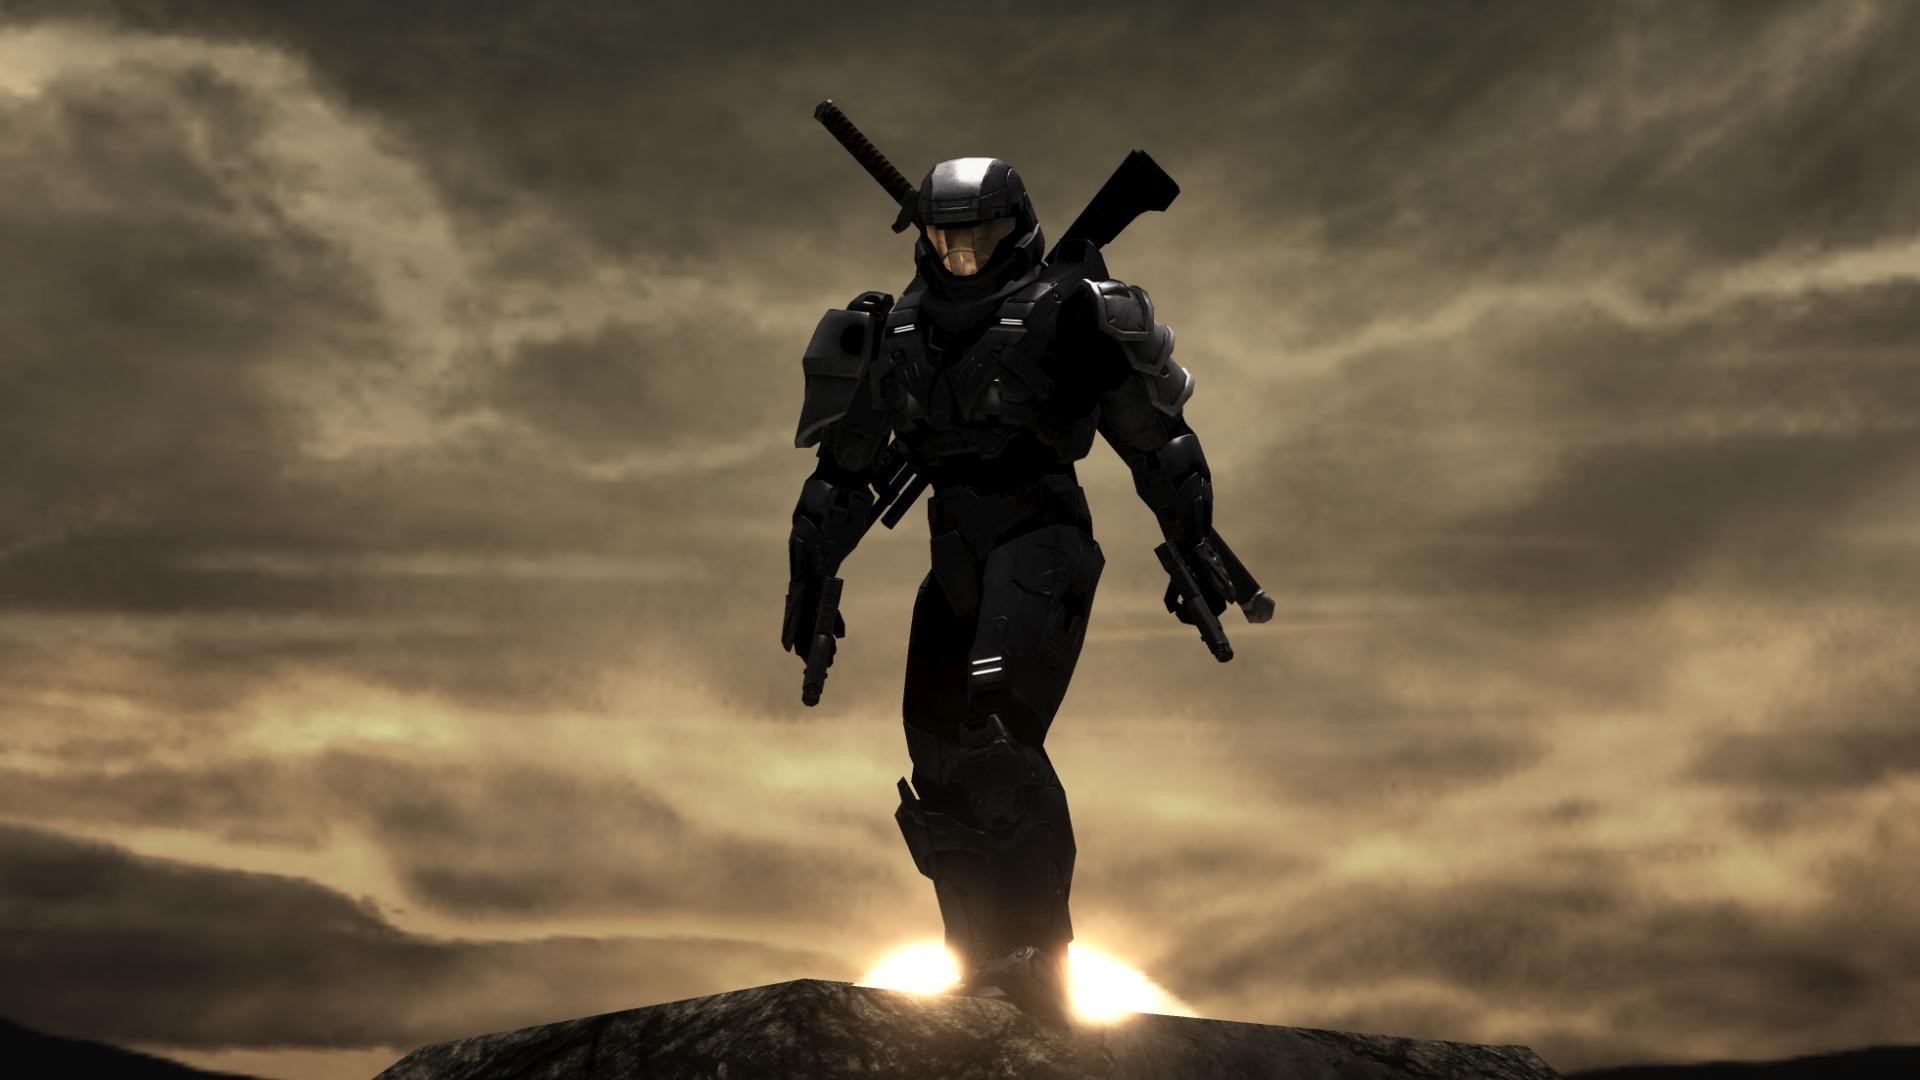 HD Wallpaper Games Halo Best For Pcs